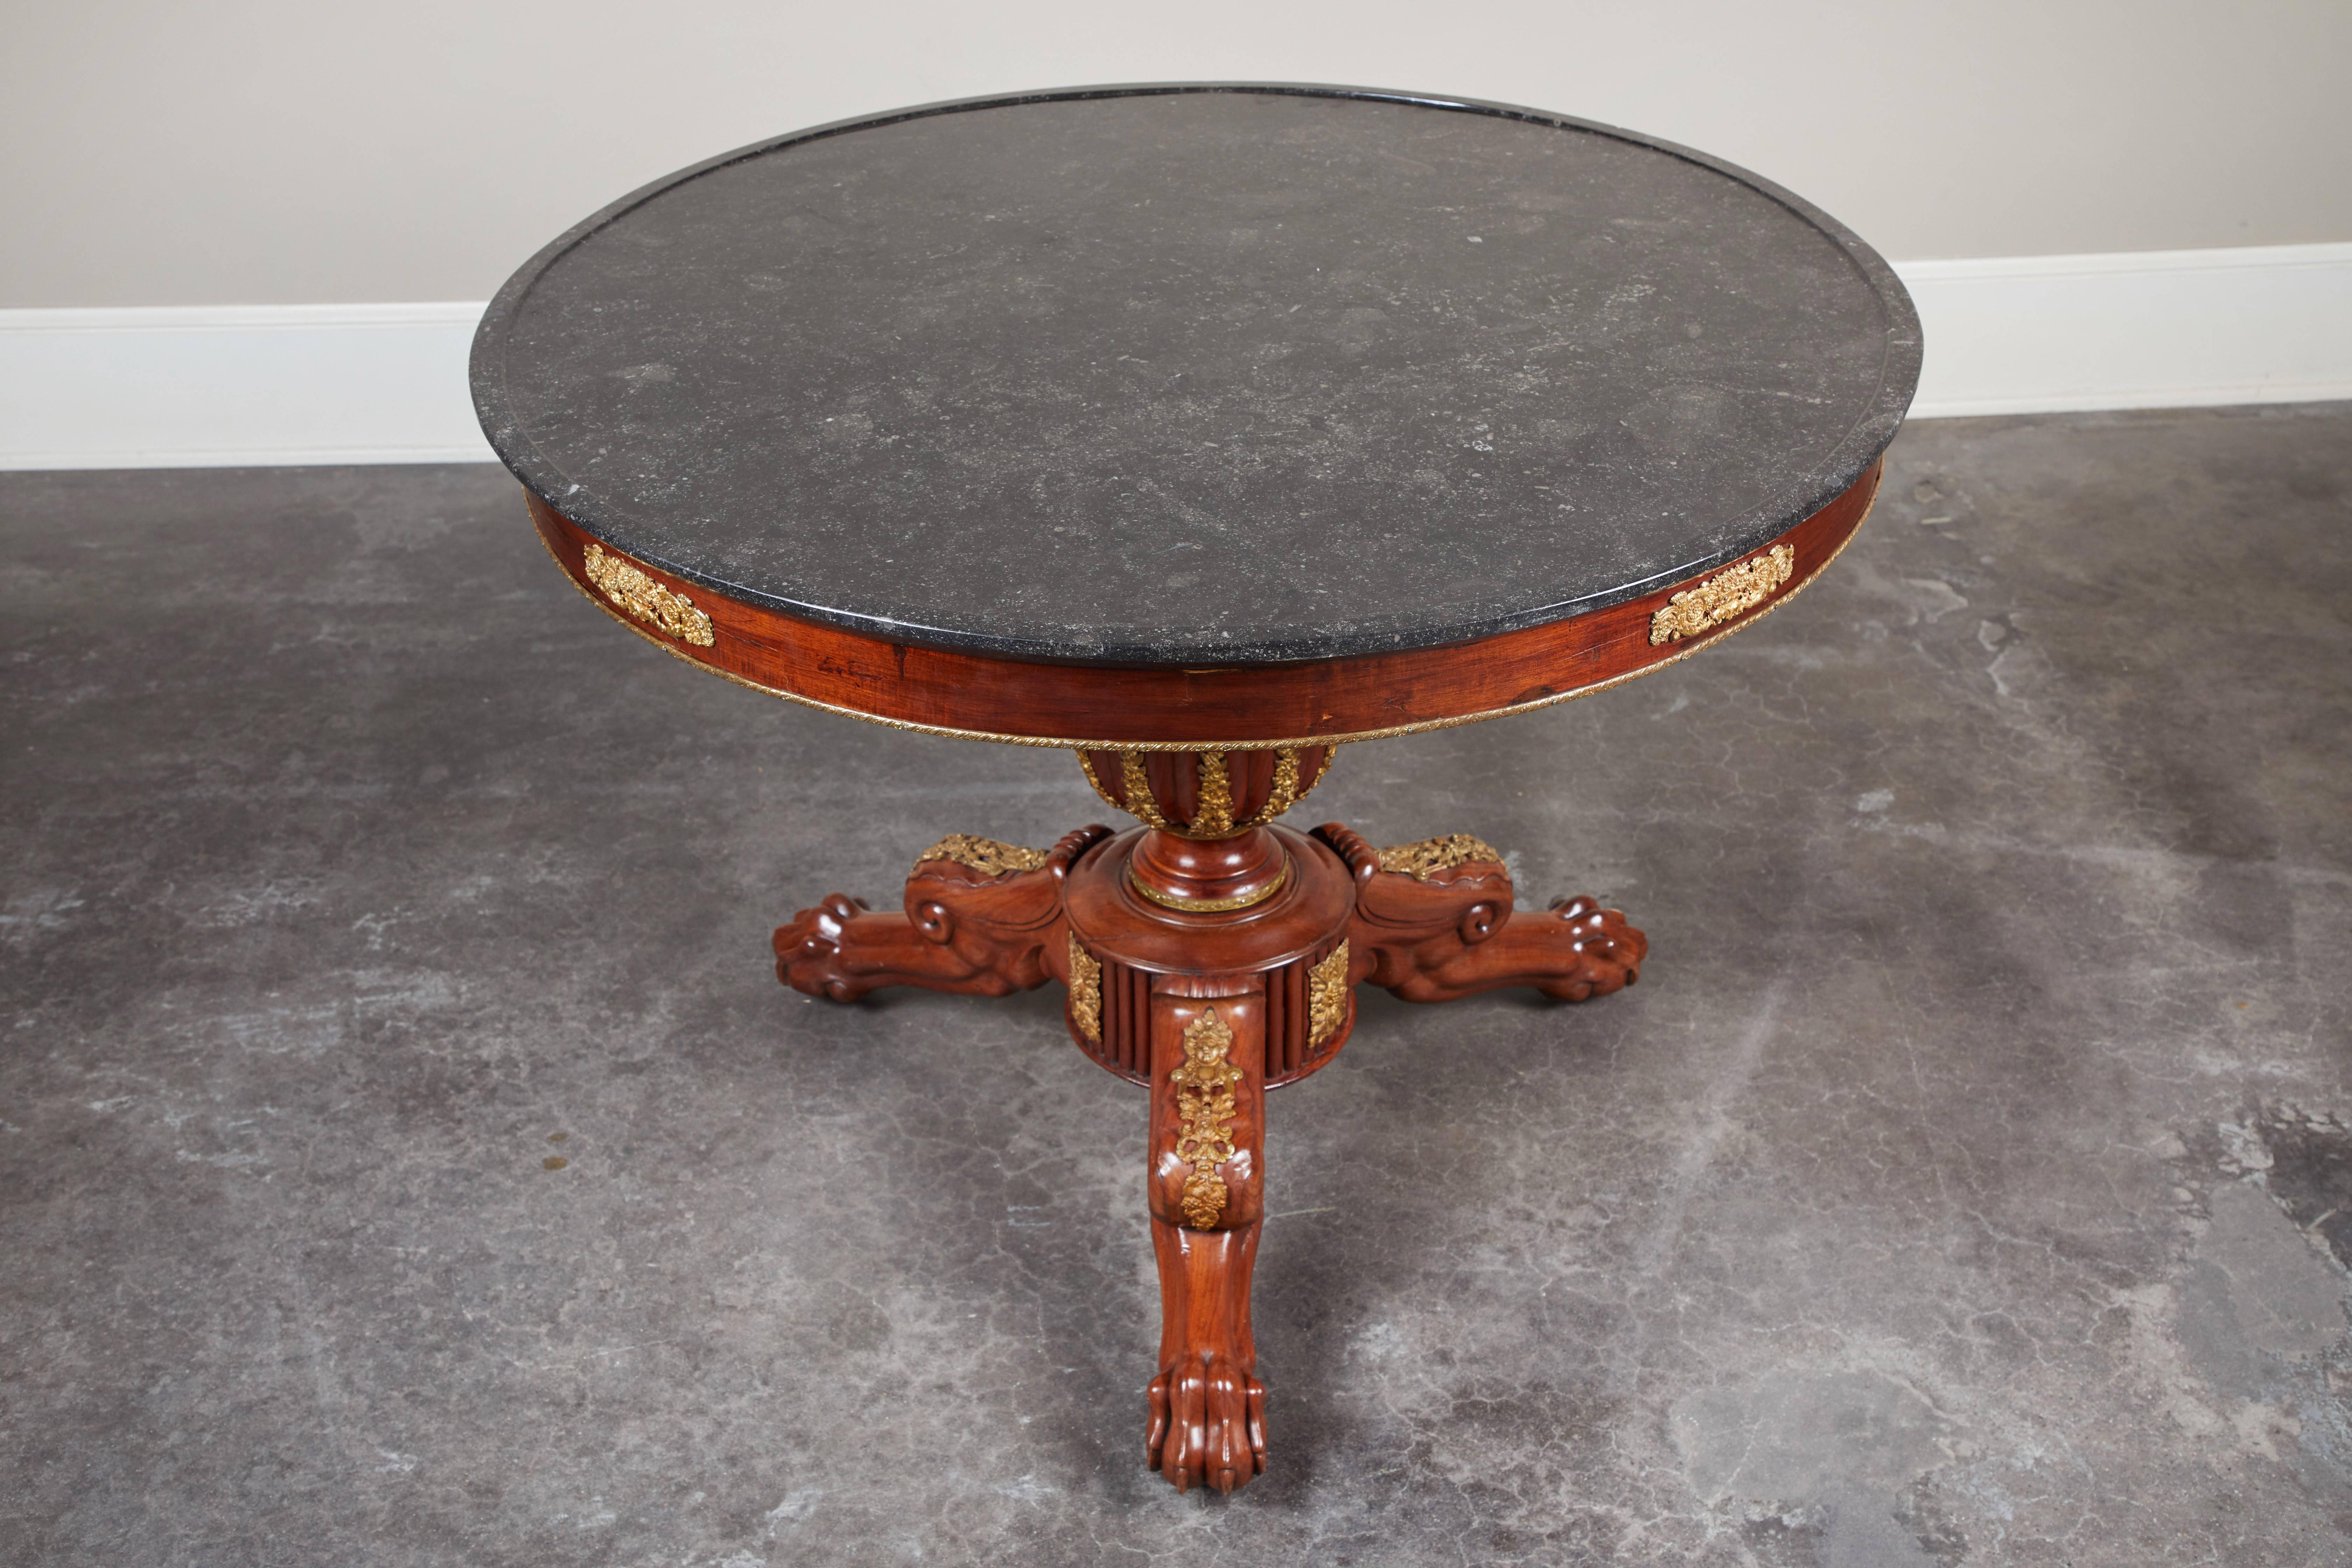 Early 19th Century French Empire Mahogany Pedestal Table with Ormolu 1